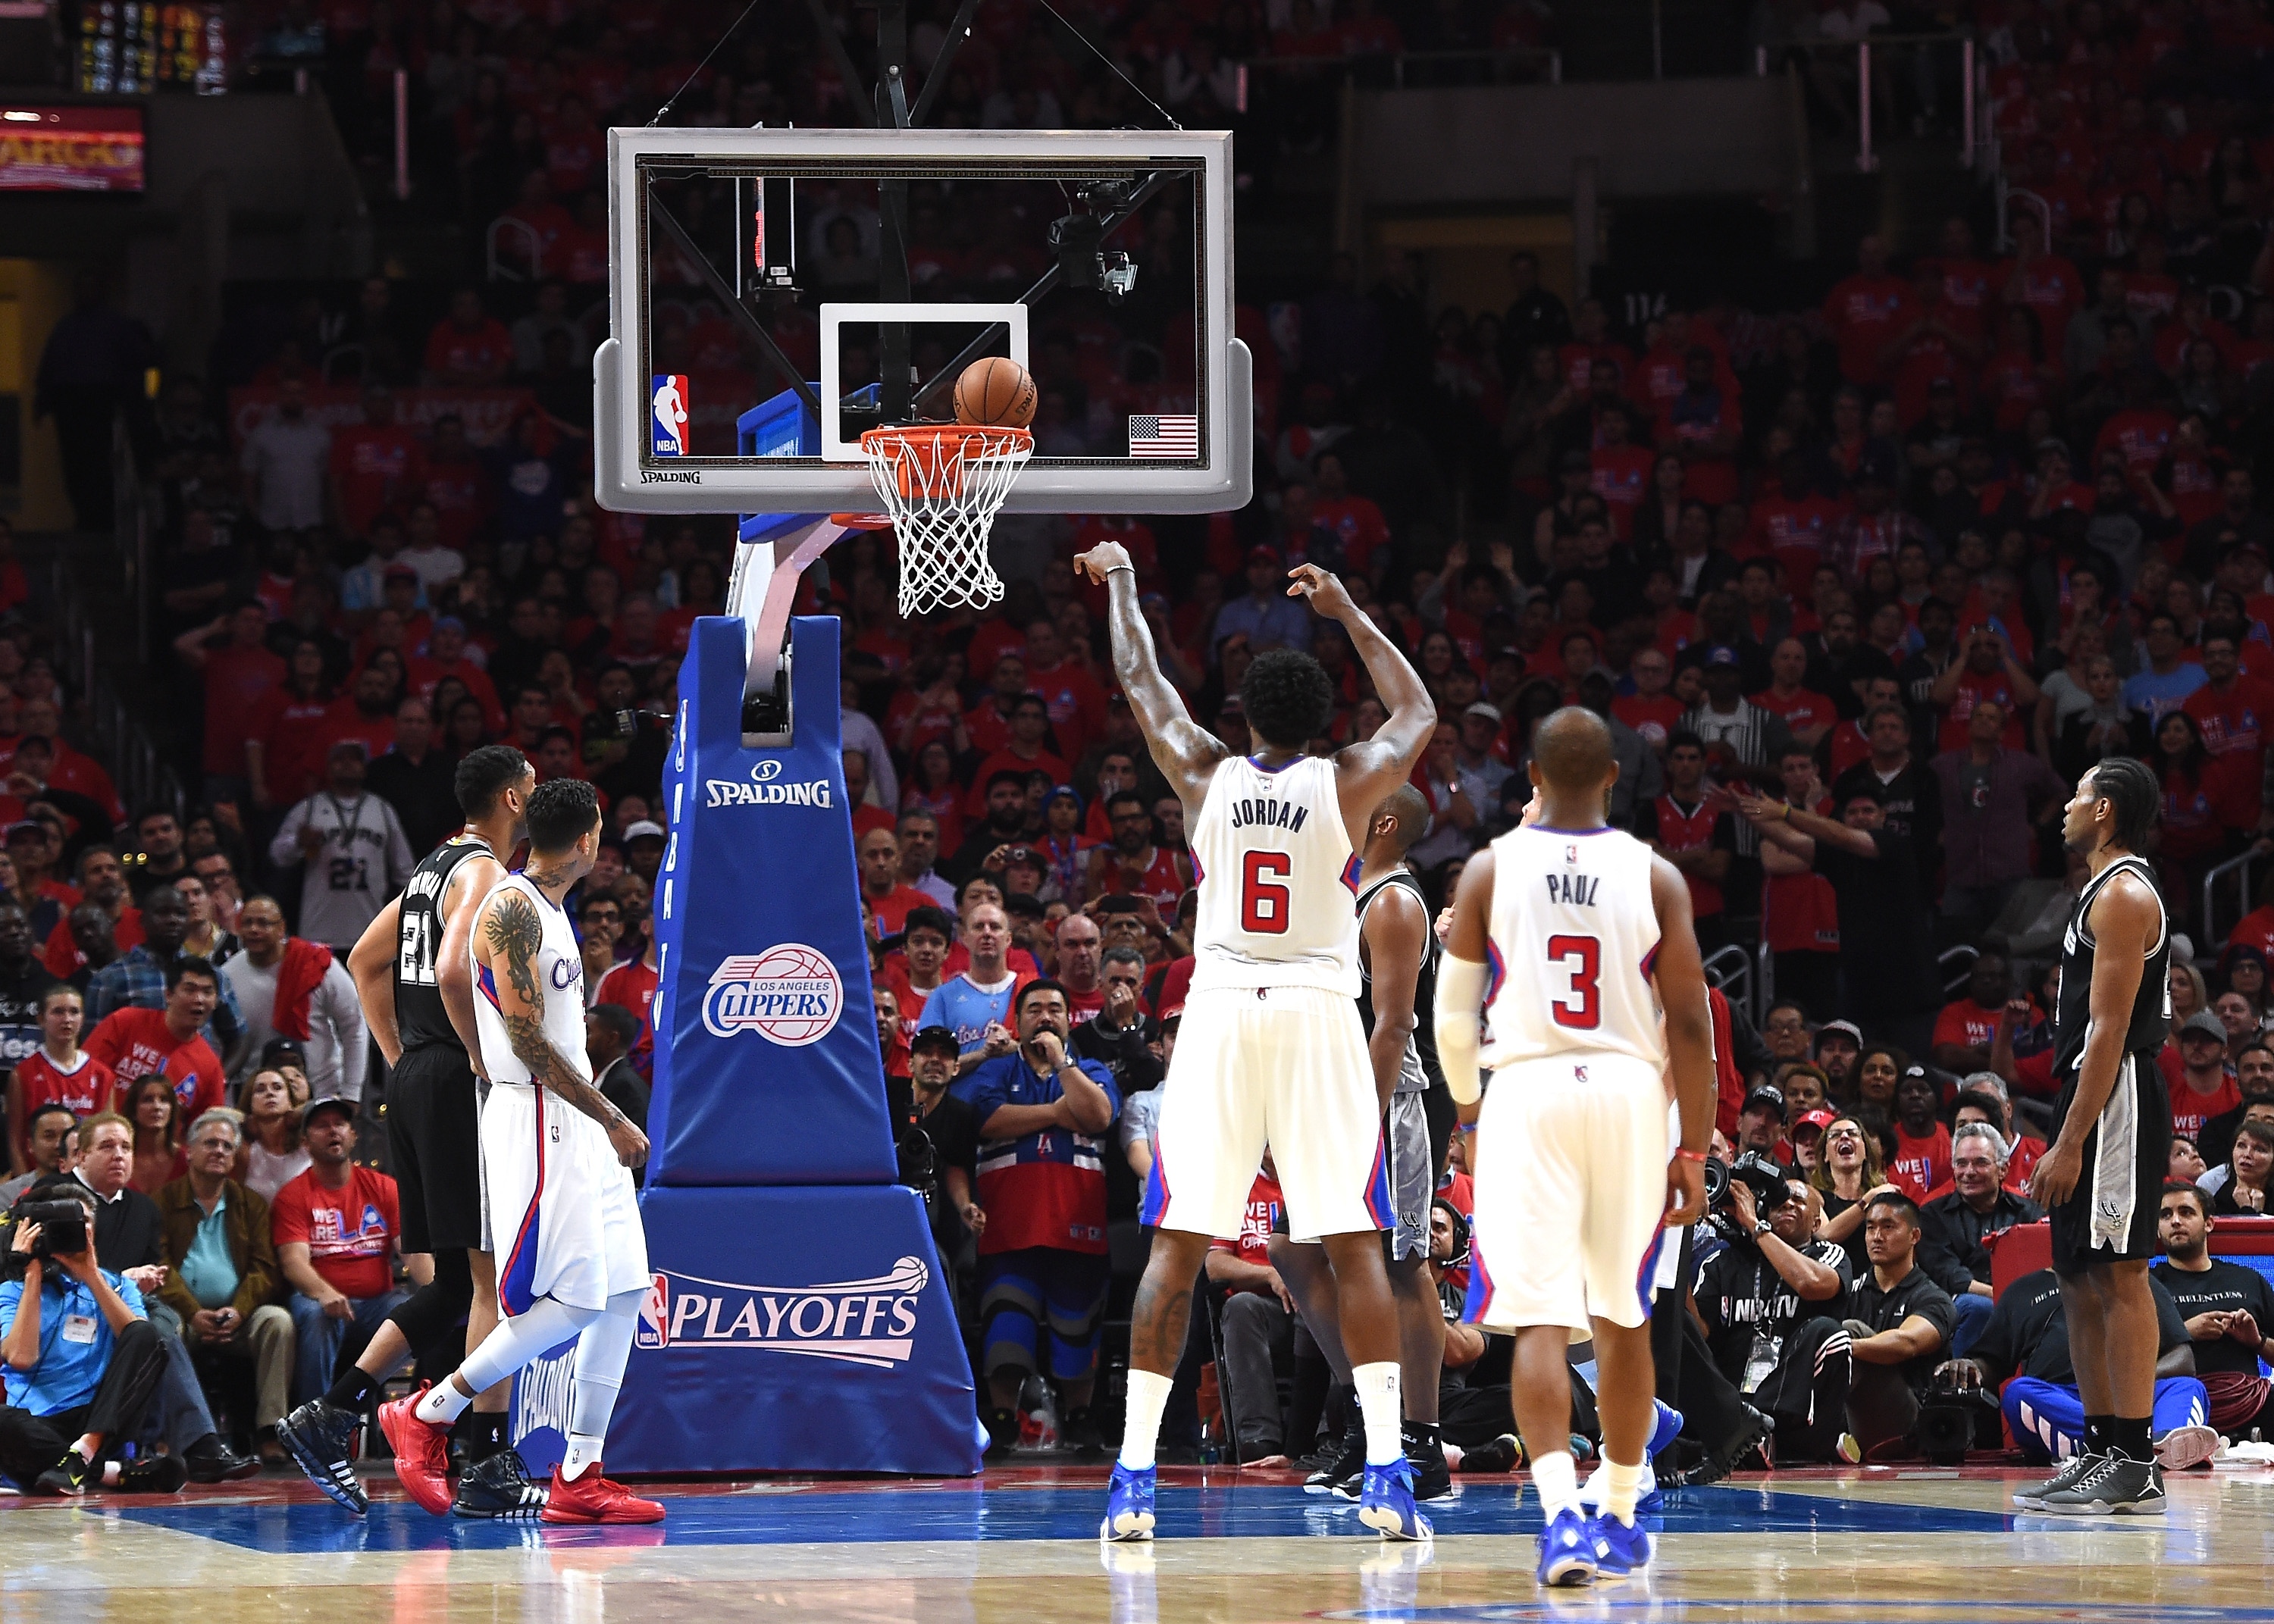 DeAndre Jordan misses a free throw. It's kind of his thing. (Harry How/Getty Images)